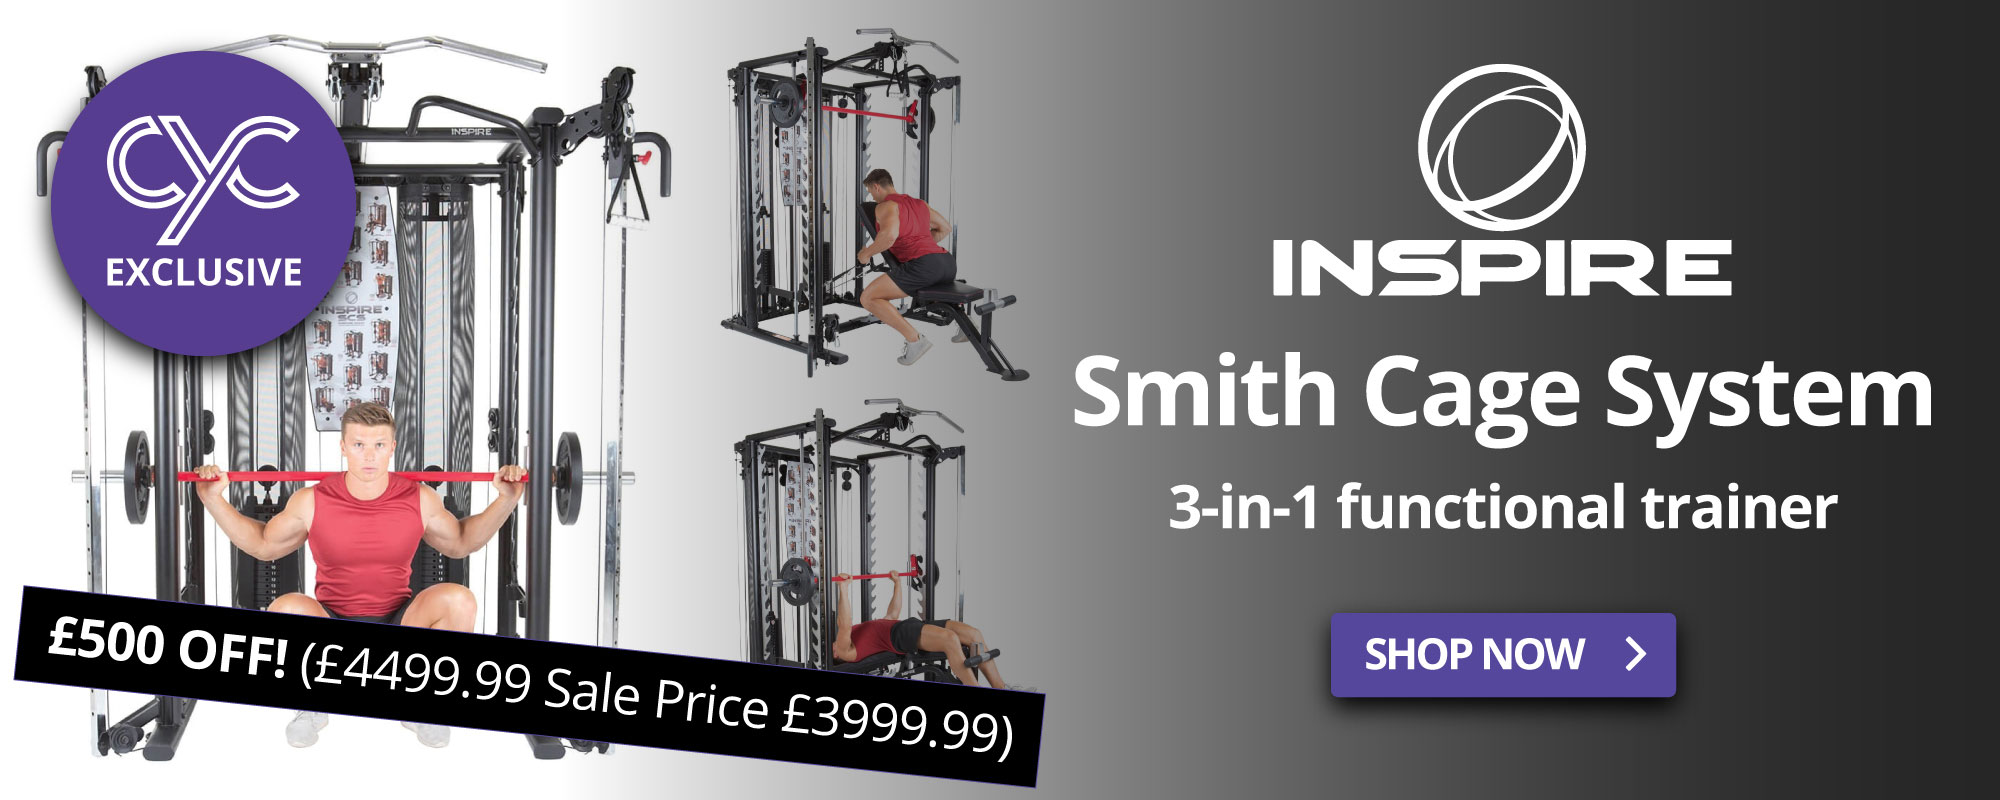 Inspire Smith Cage System 3-in-1 functional trainer - £500 OFF (Sale Price £3999.99) - Shop Now